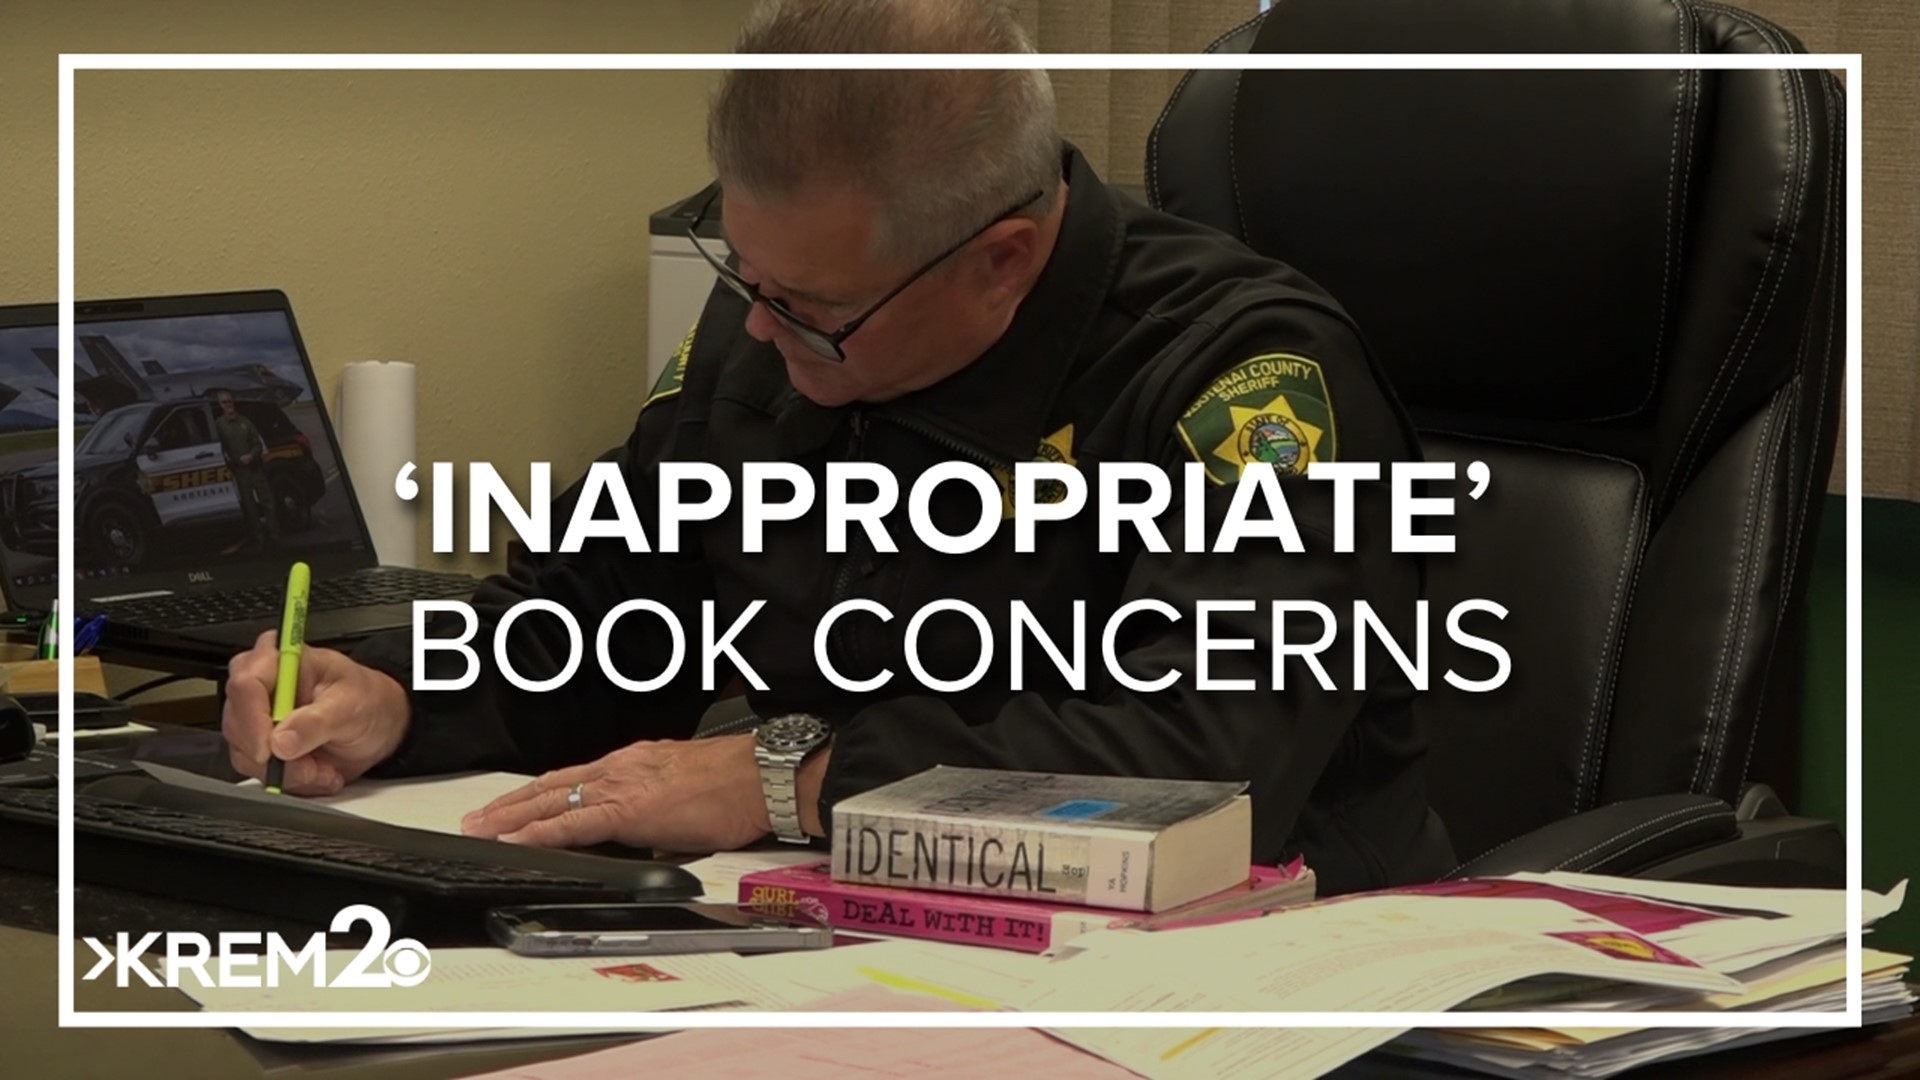 The sheriff says certain"young adult" books should be reclassified as "adult books" due to graphic content.